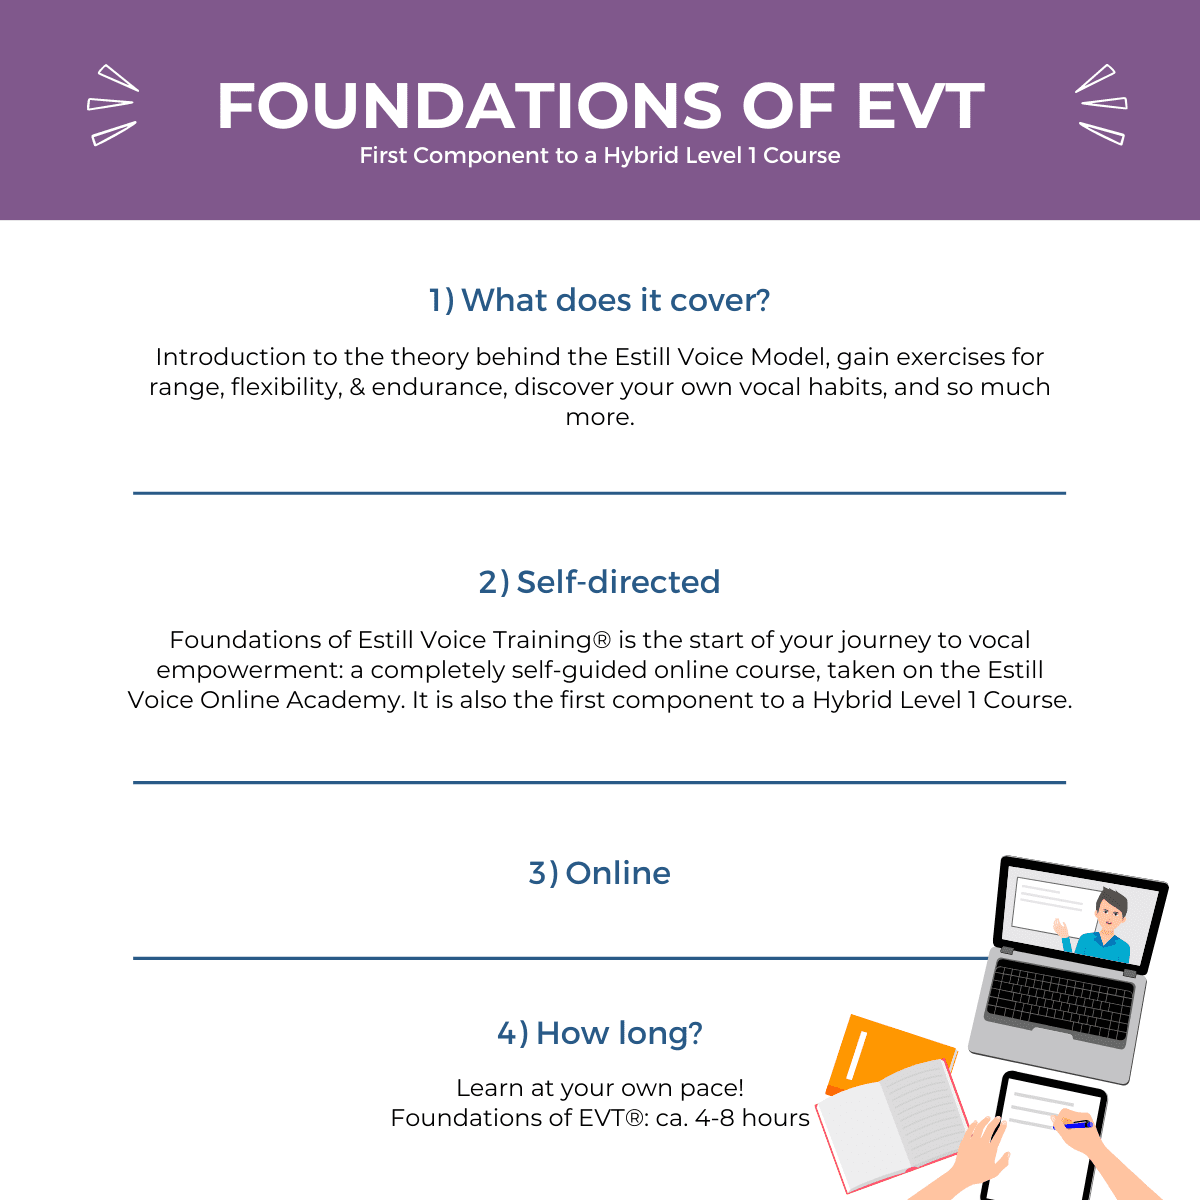 Foundations of EVT